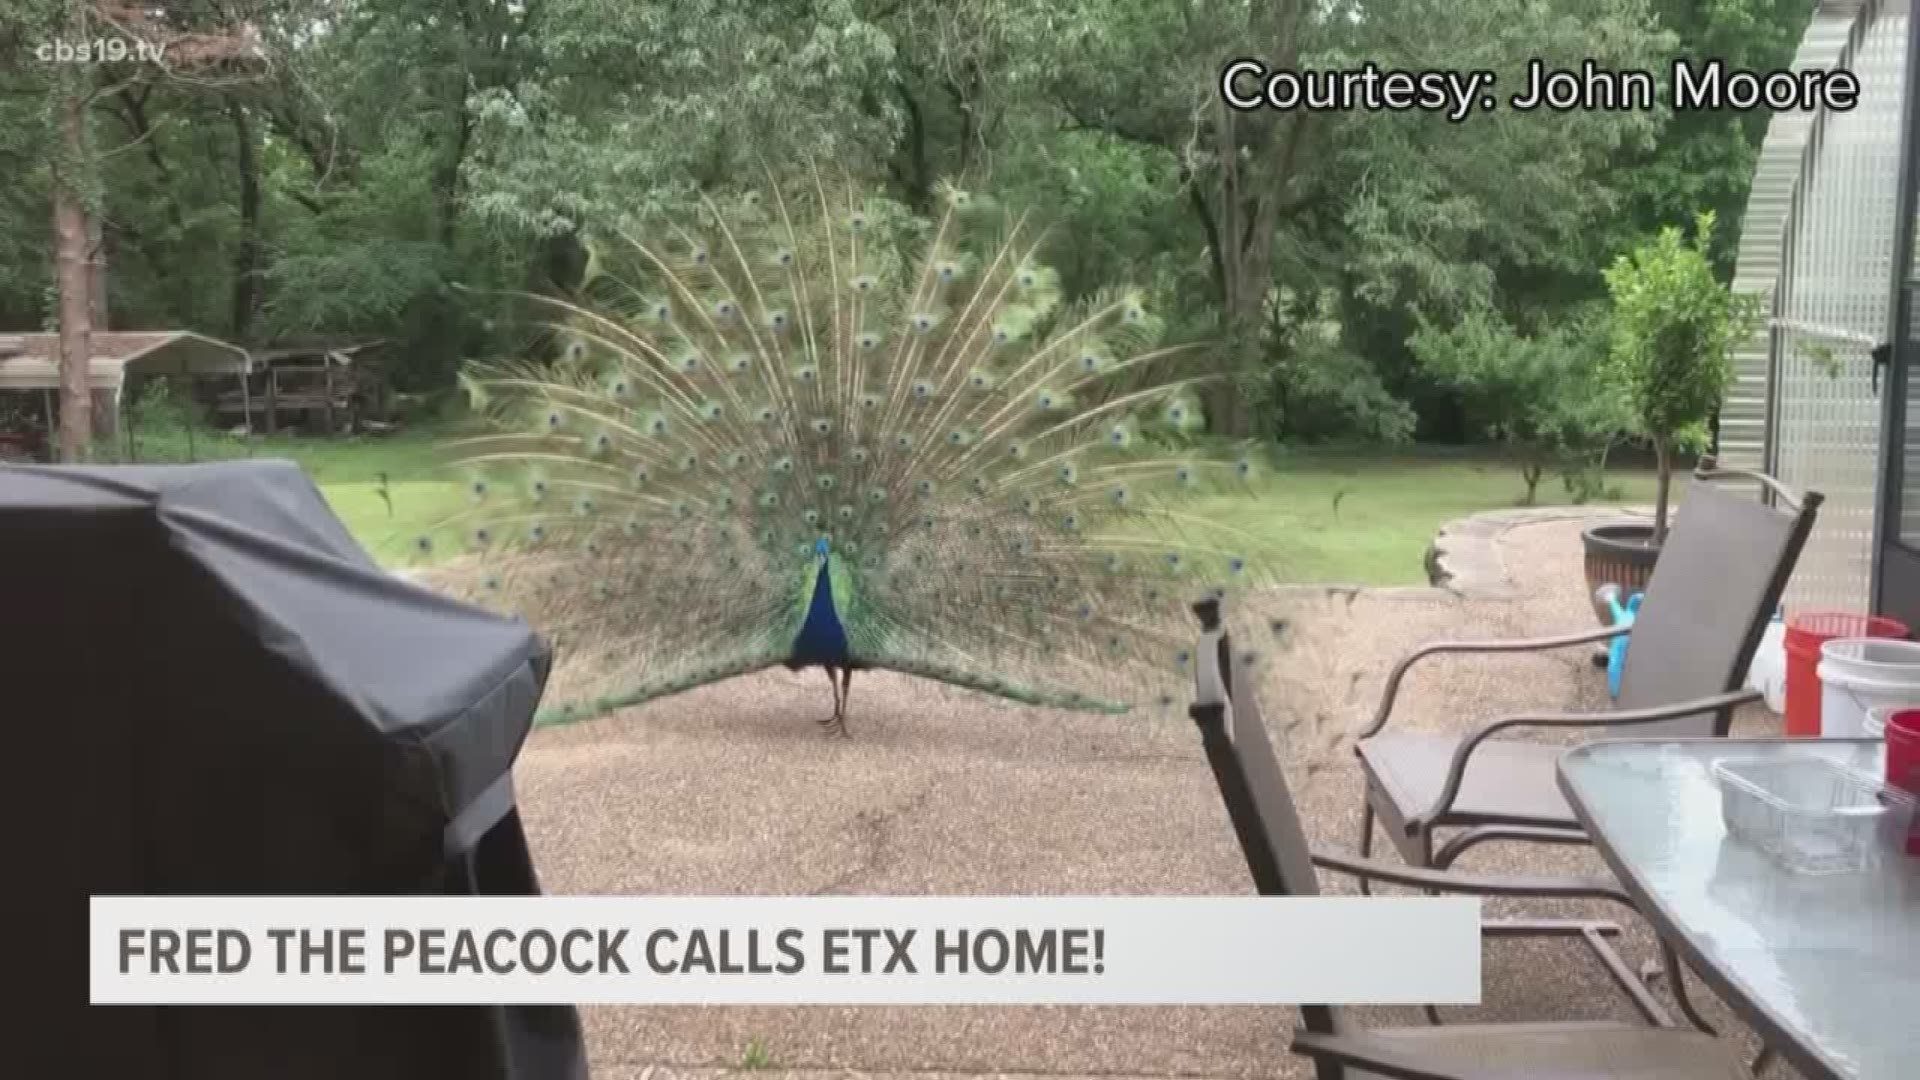 We've all heard if you see a cardinal after a loved one's passing, it's a symbol they're still with you. But, what if you see a peacock? That was the case for Whitehouse's John Moore and Fred The Peacock!